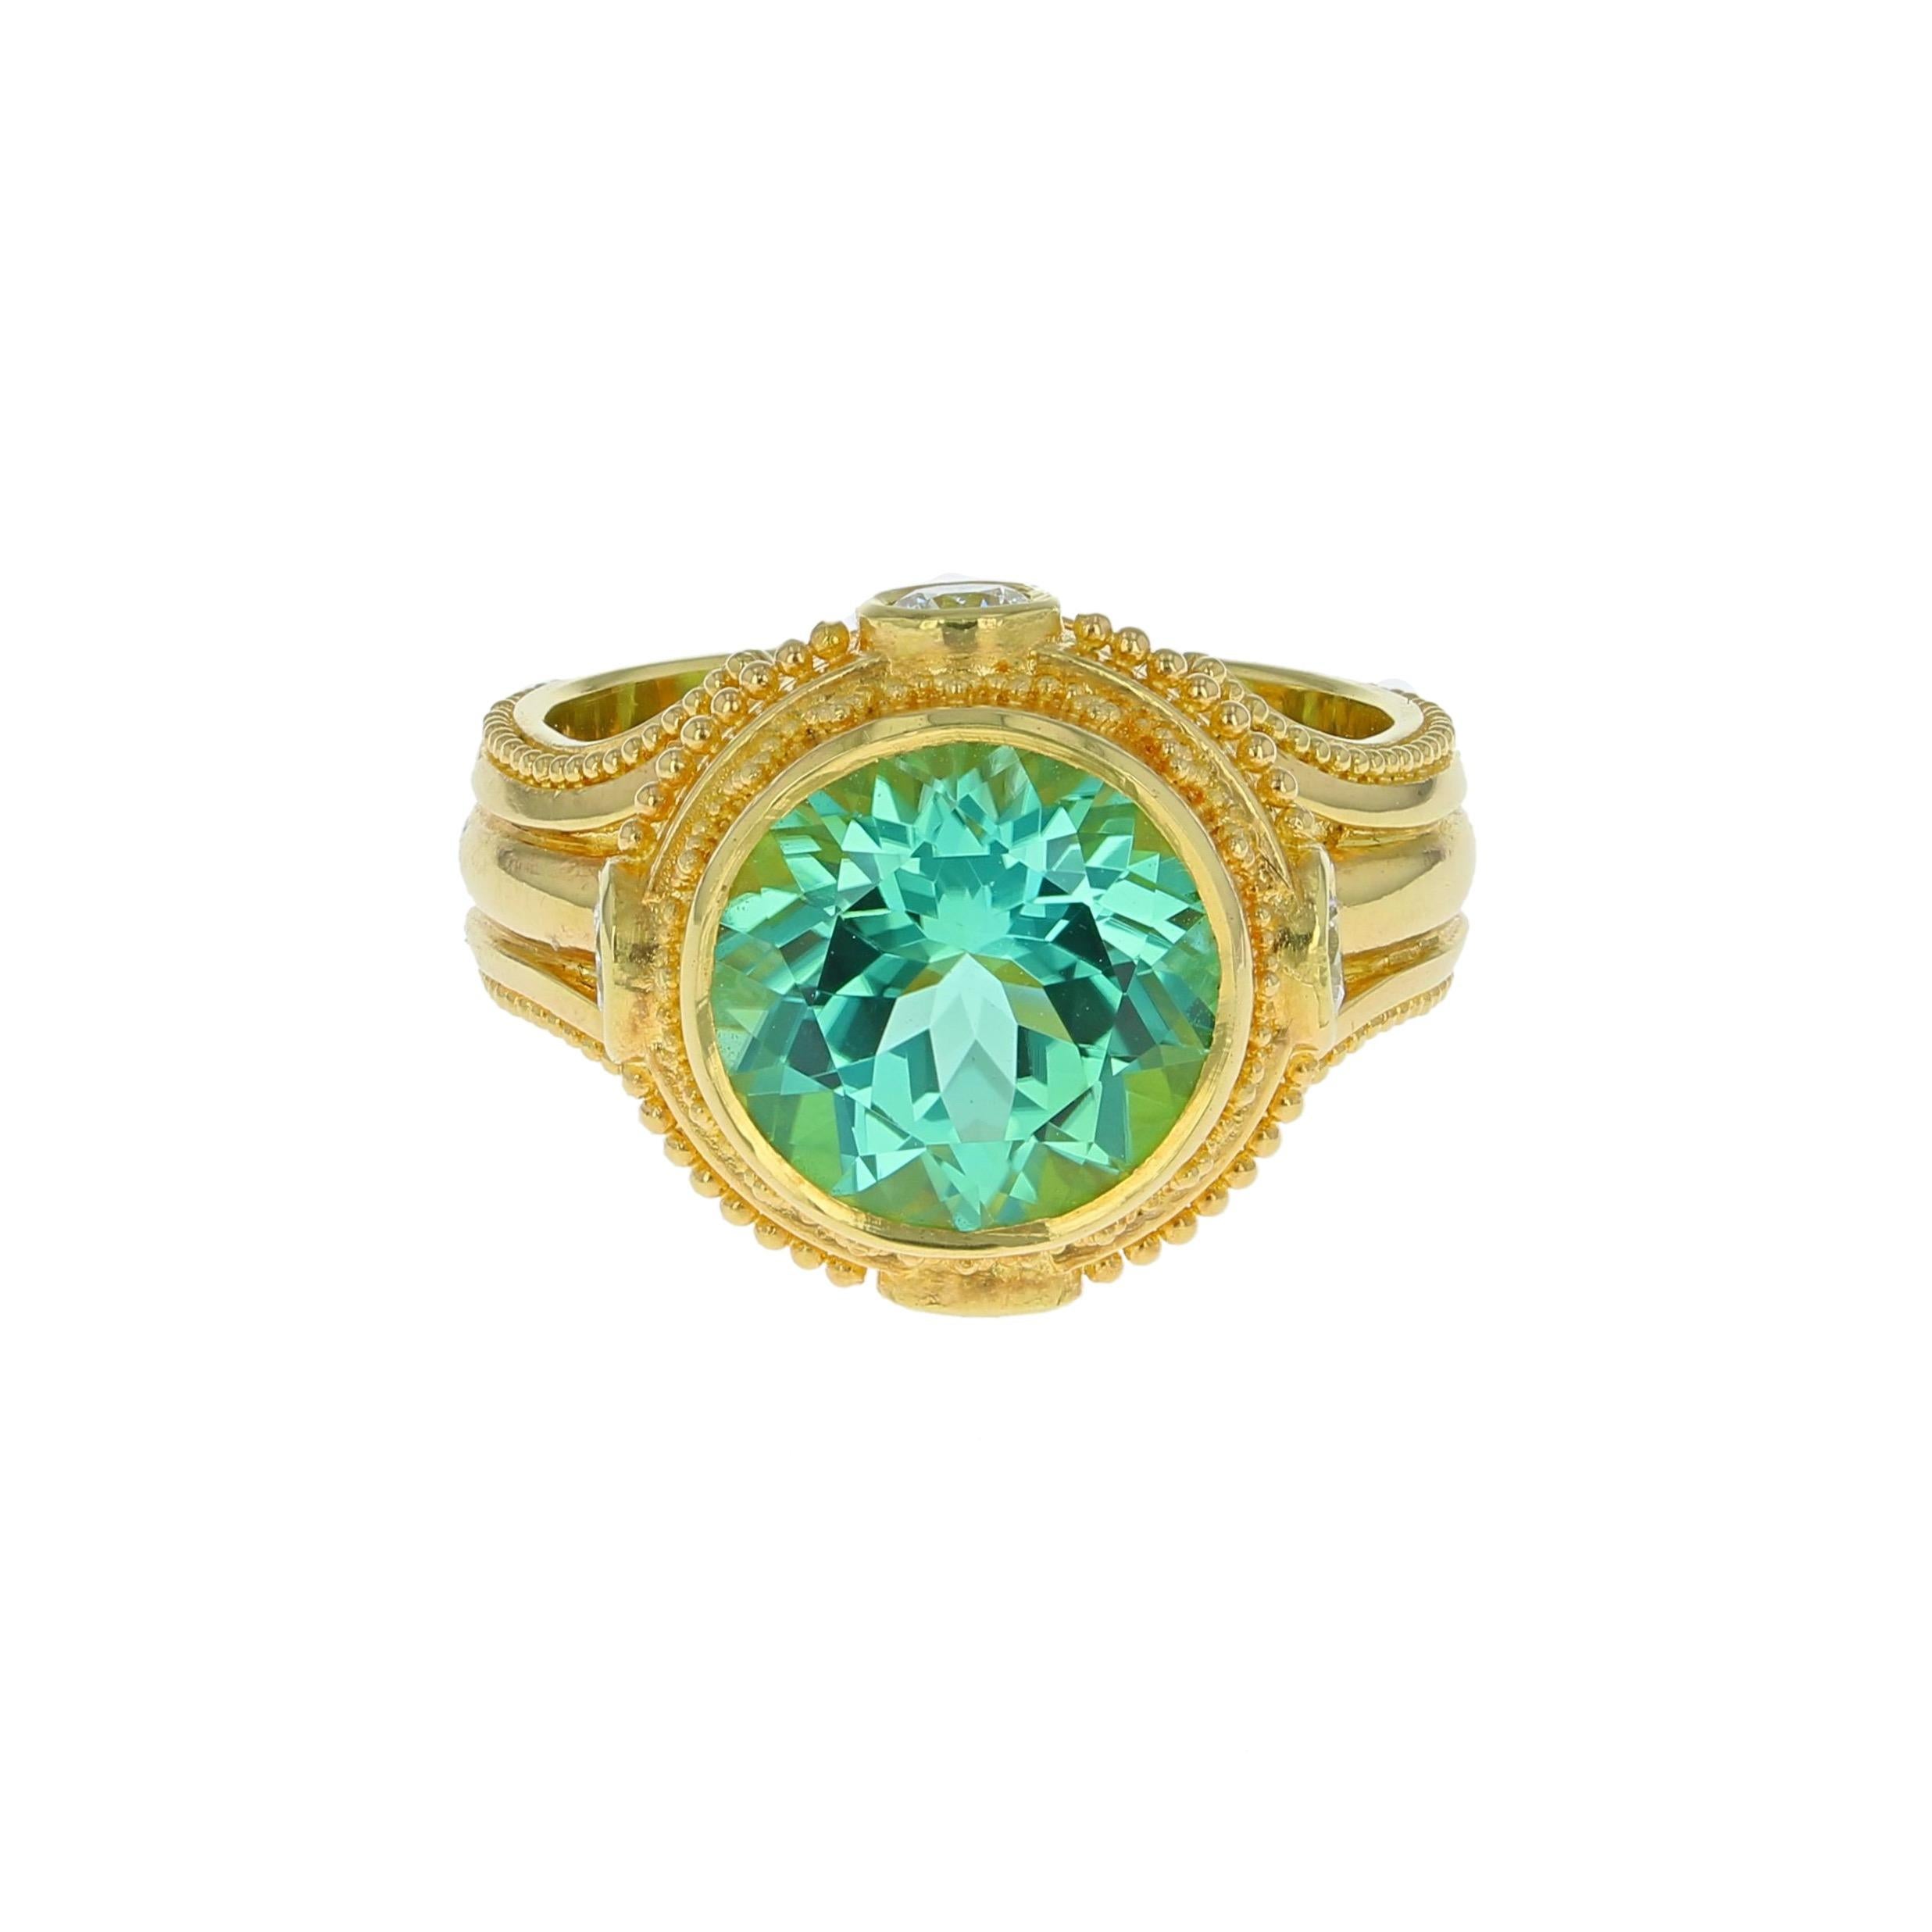 From the Kent Raible limited edition Studio Collection, we present the Prayer Wheel Ring.

The Seafoam Tourmaline, rare in this quality for its size, is accented by four Diamonds, representing the four directions, embellished with 18 karat Gold